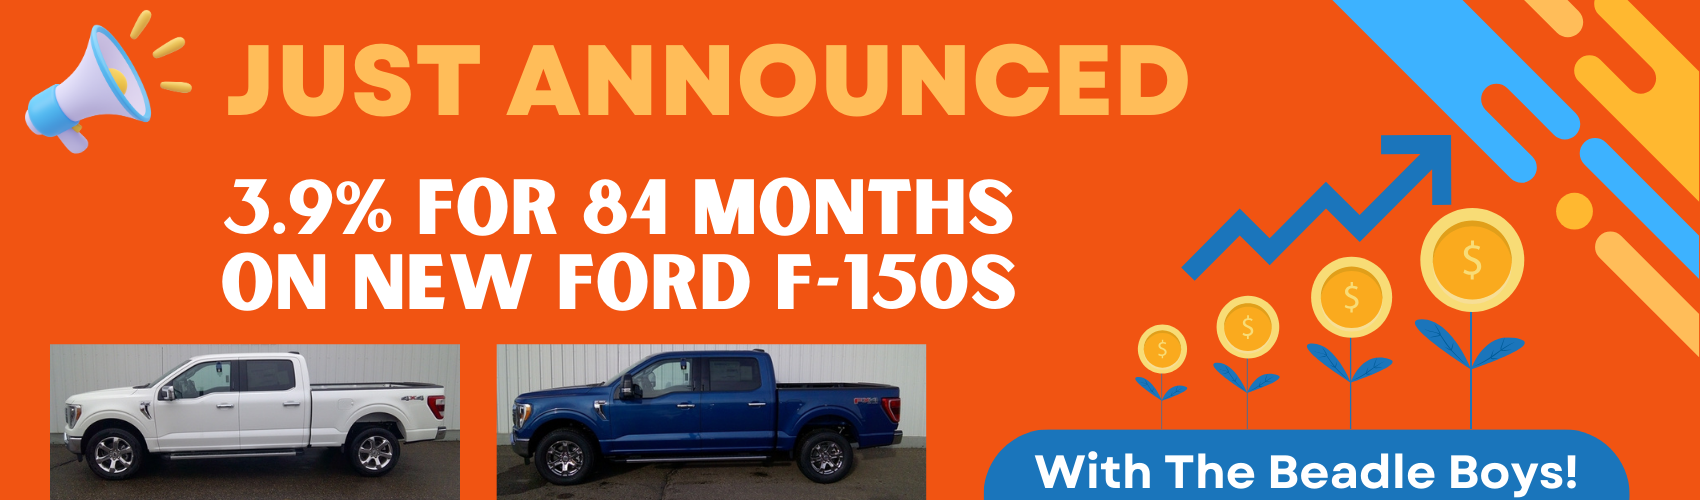 3.9% For 84 Months on New Ford F150